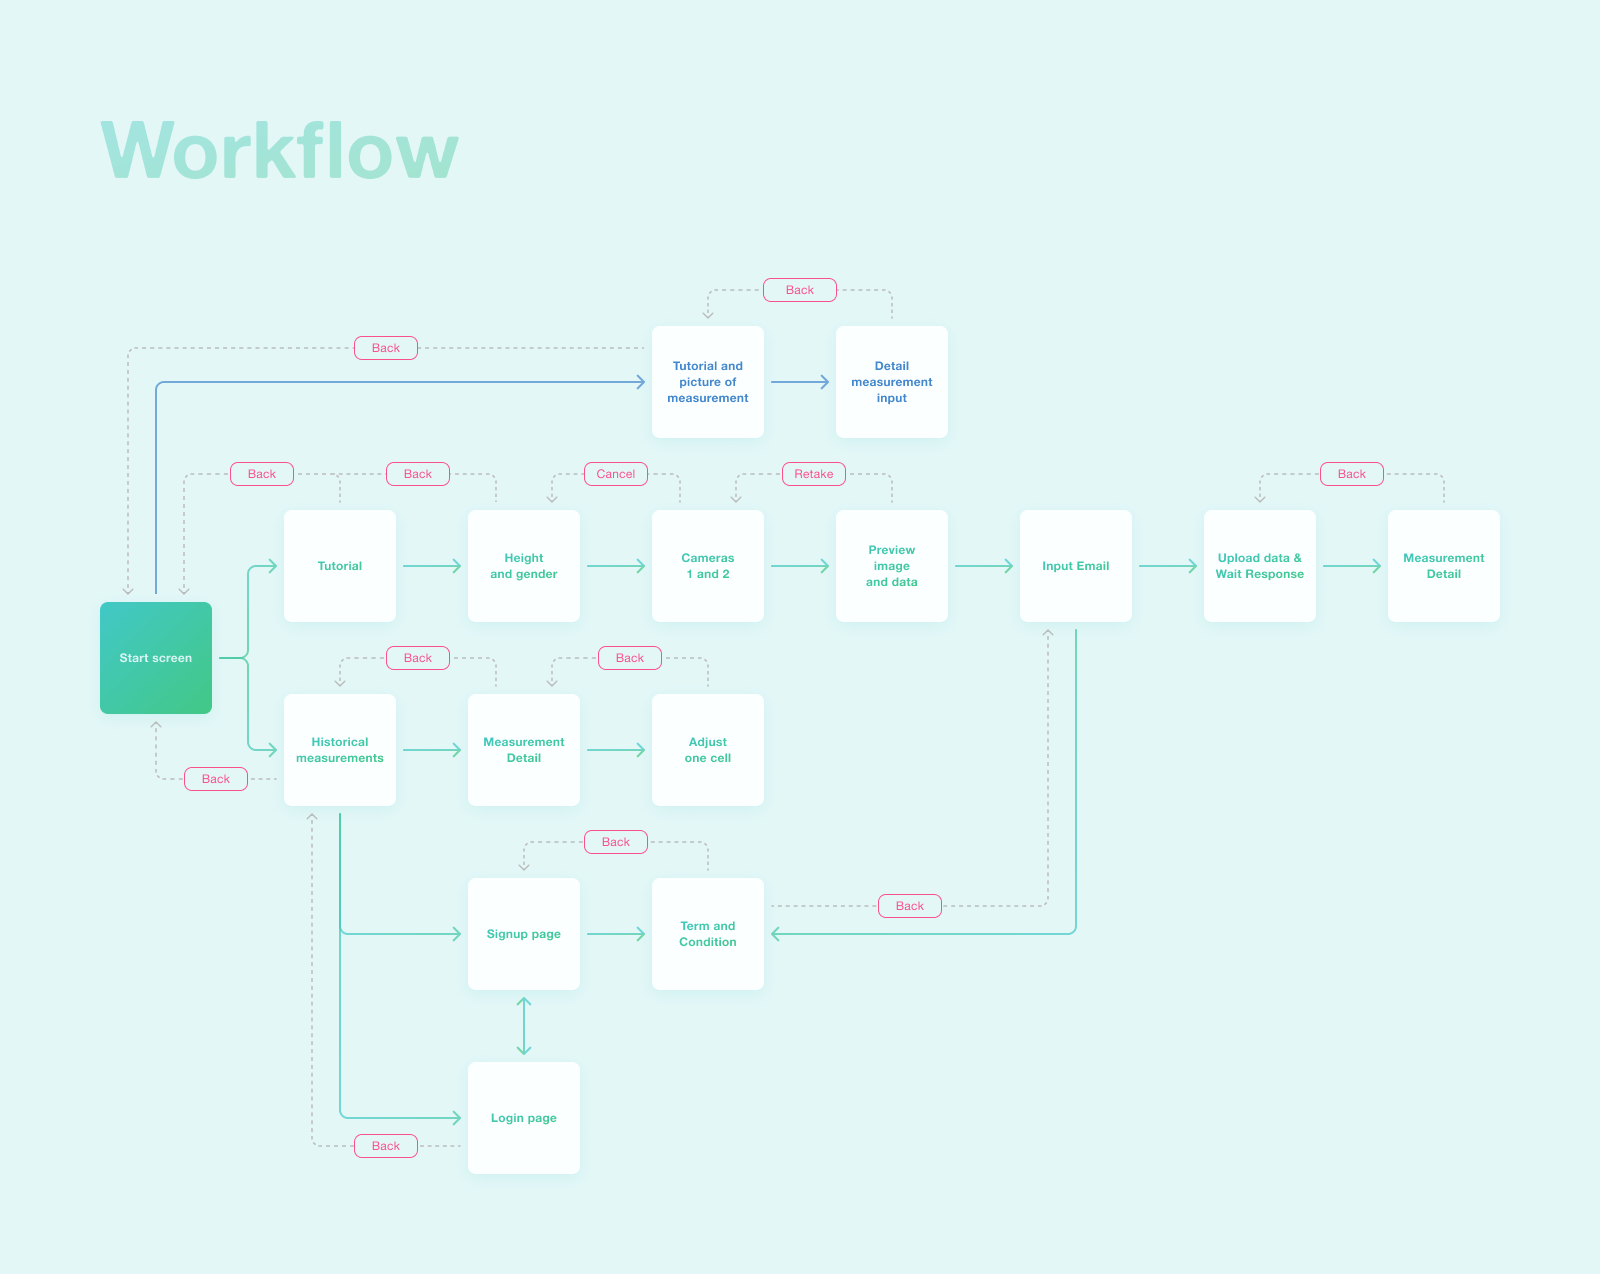 Overview of The Workflow